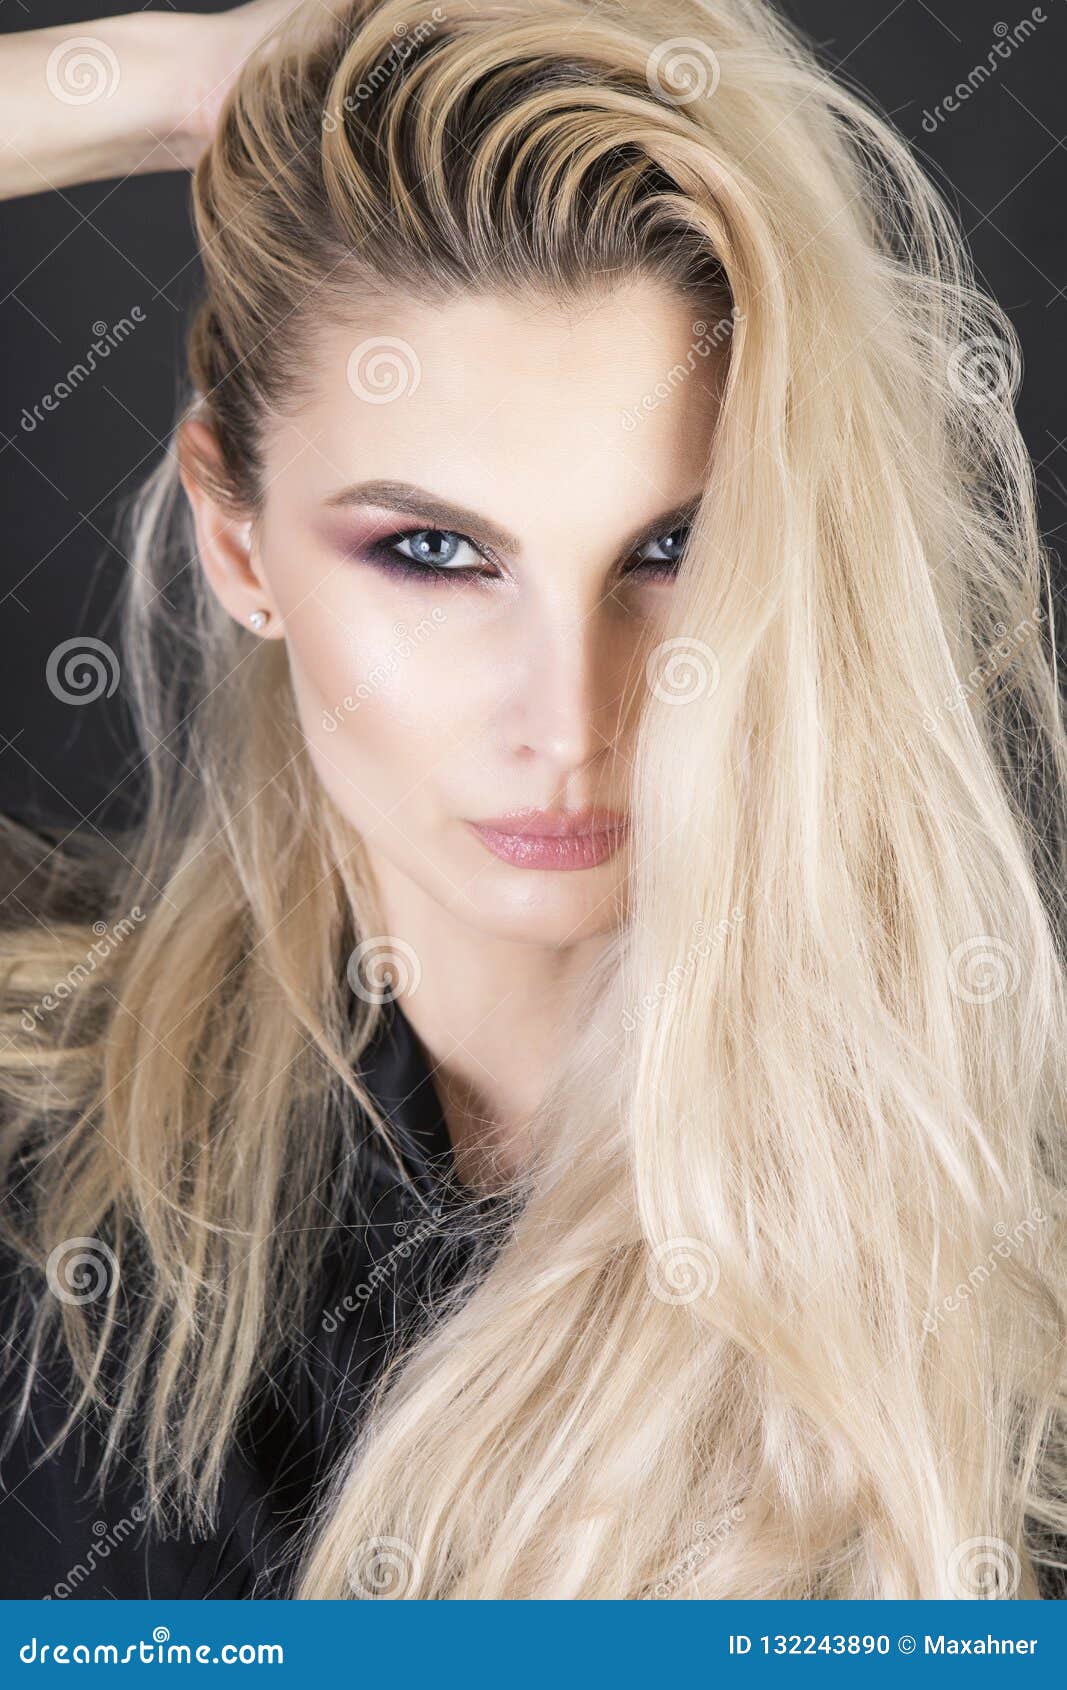 Strong Looking Professional Model with Messy Hairstyle Stock Photo - Image  of face, beautiful: 132243890